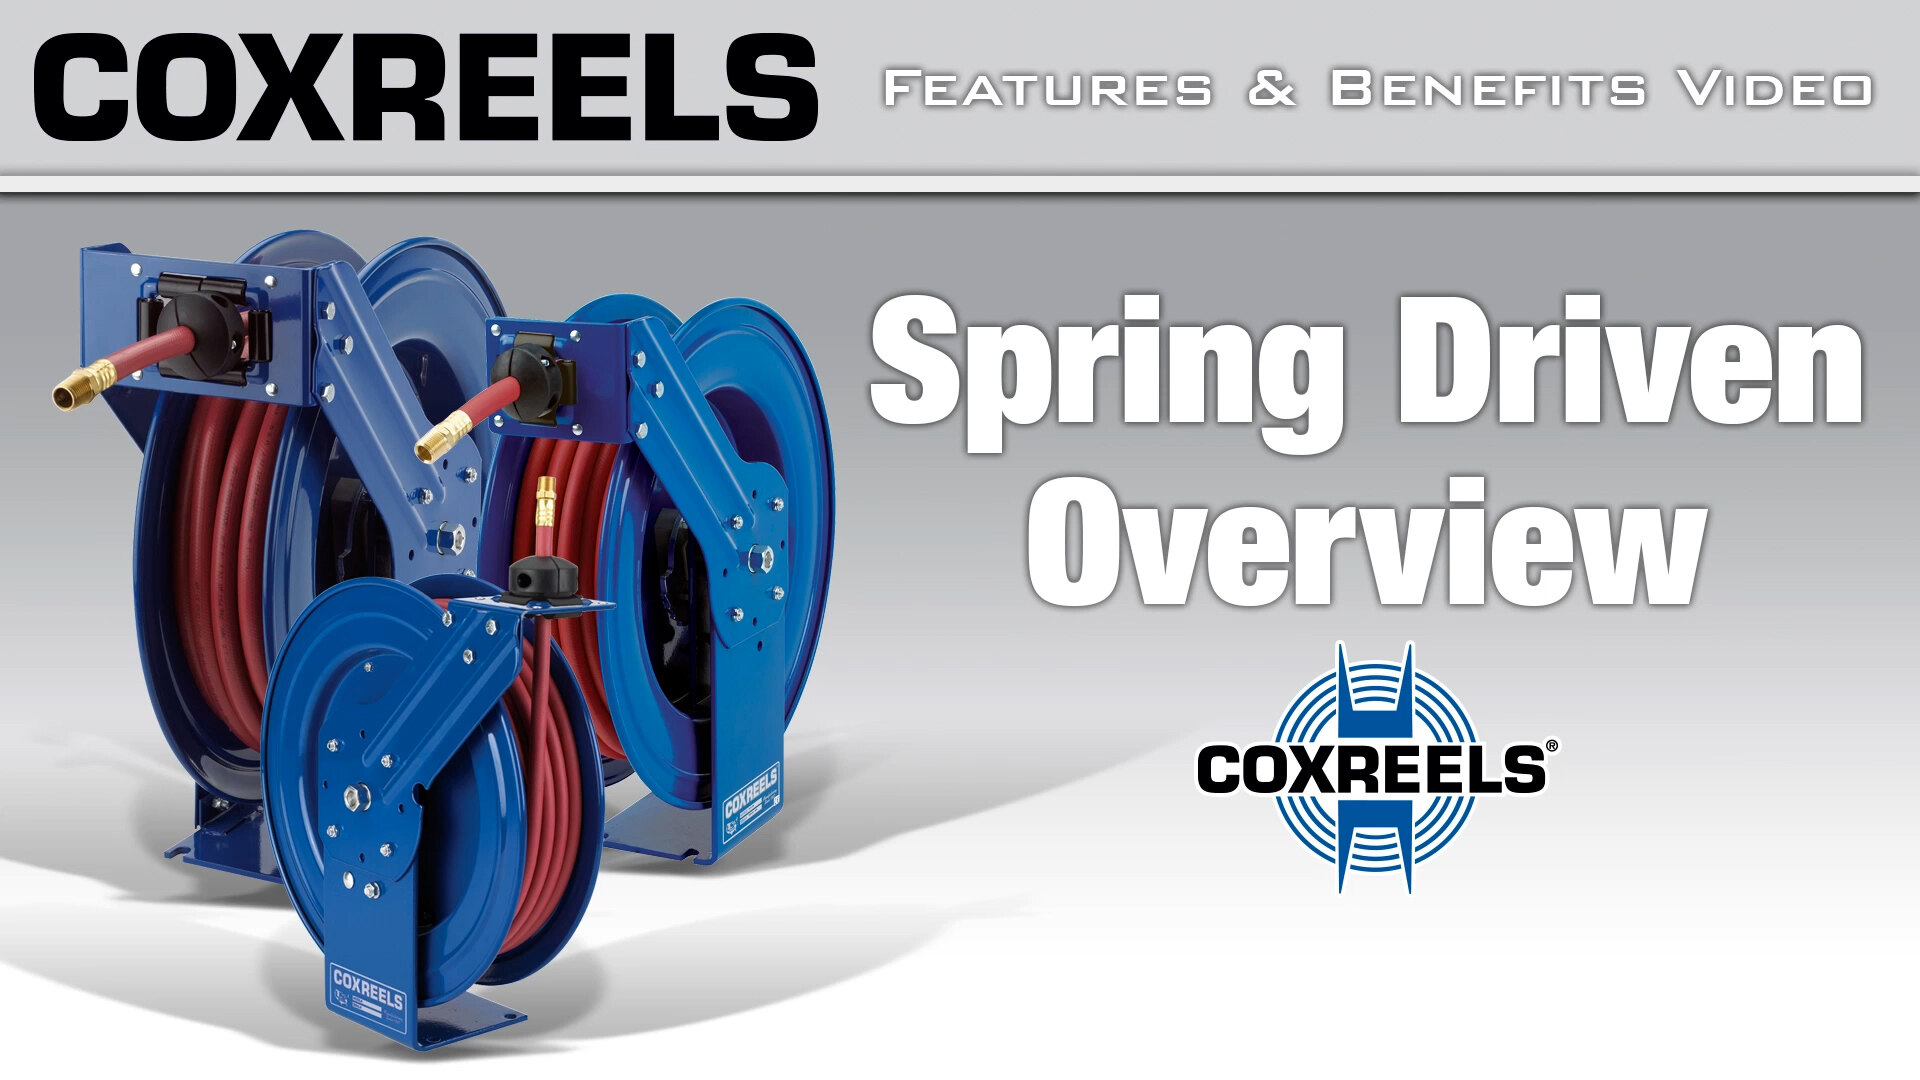 Coxreels Features & Benefits - Spring Driven Overview Video